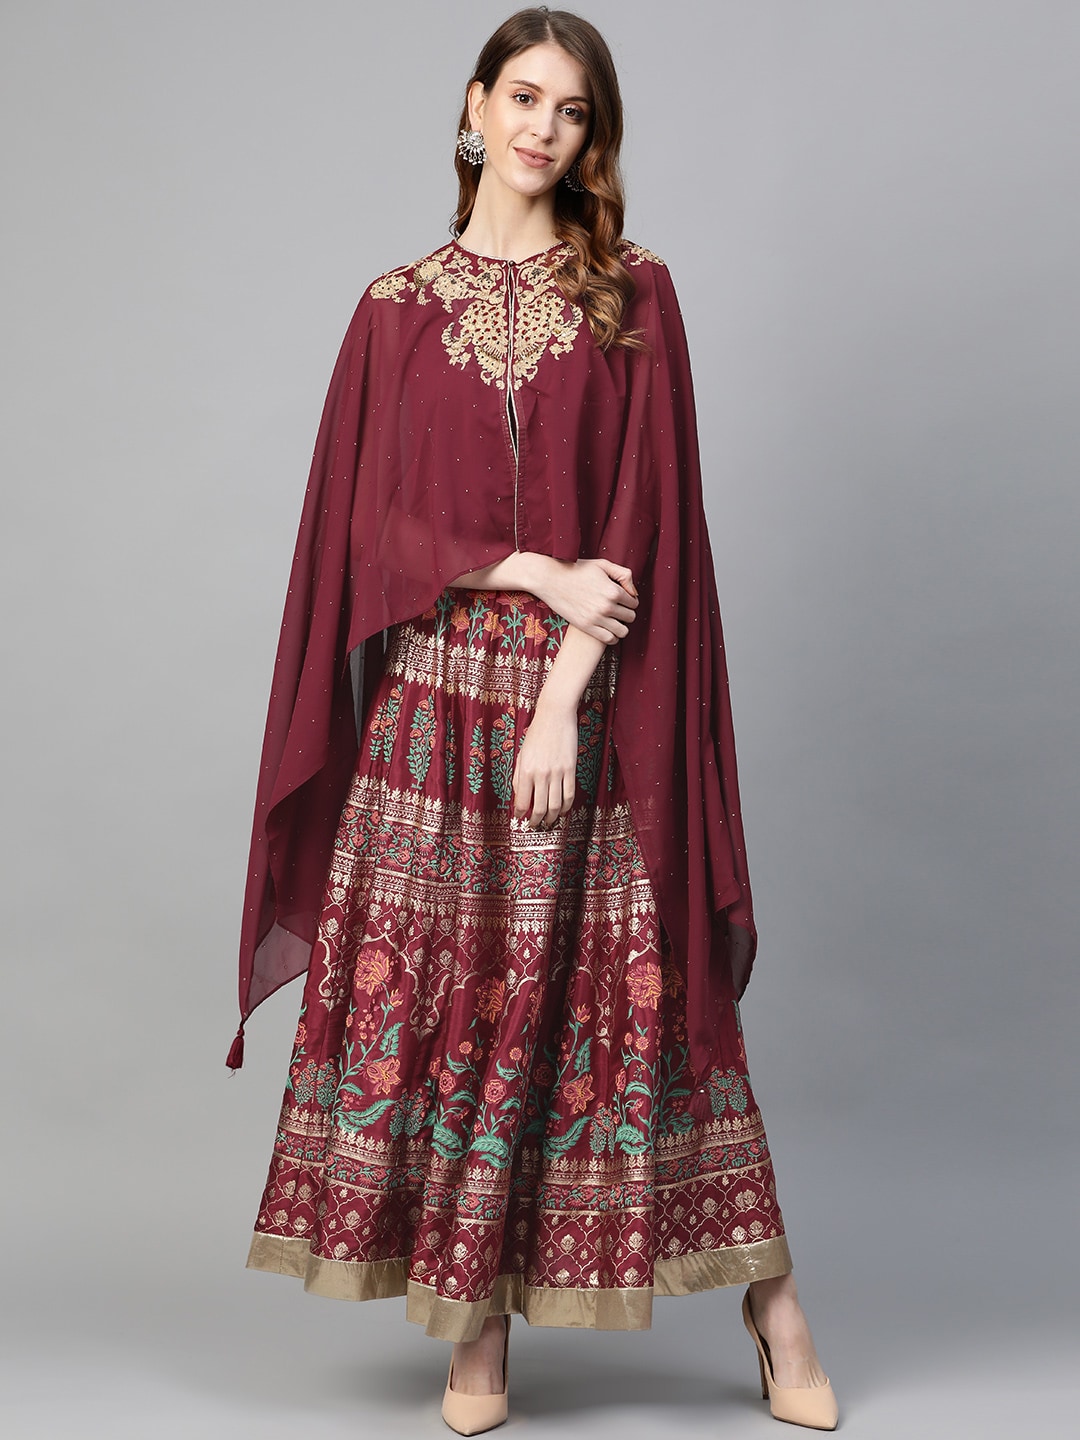 WISHFUL by W Women Maroon & Golden Embroidered Top with Skirt Price in India